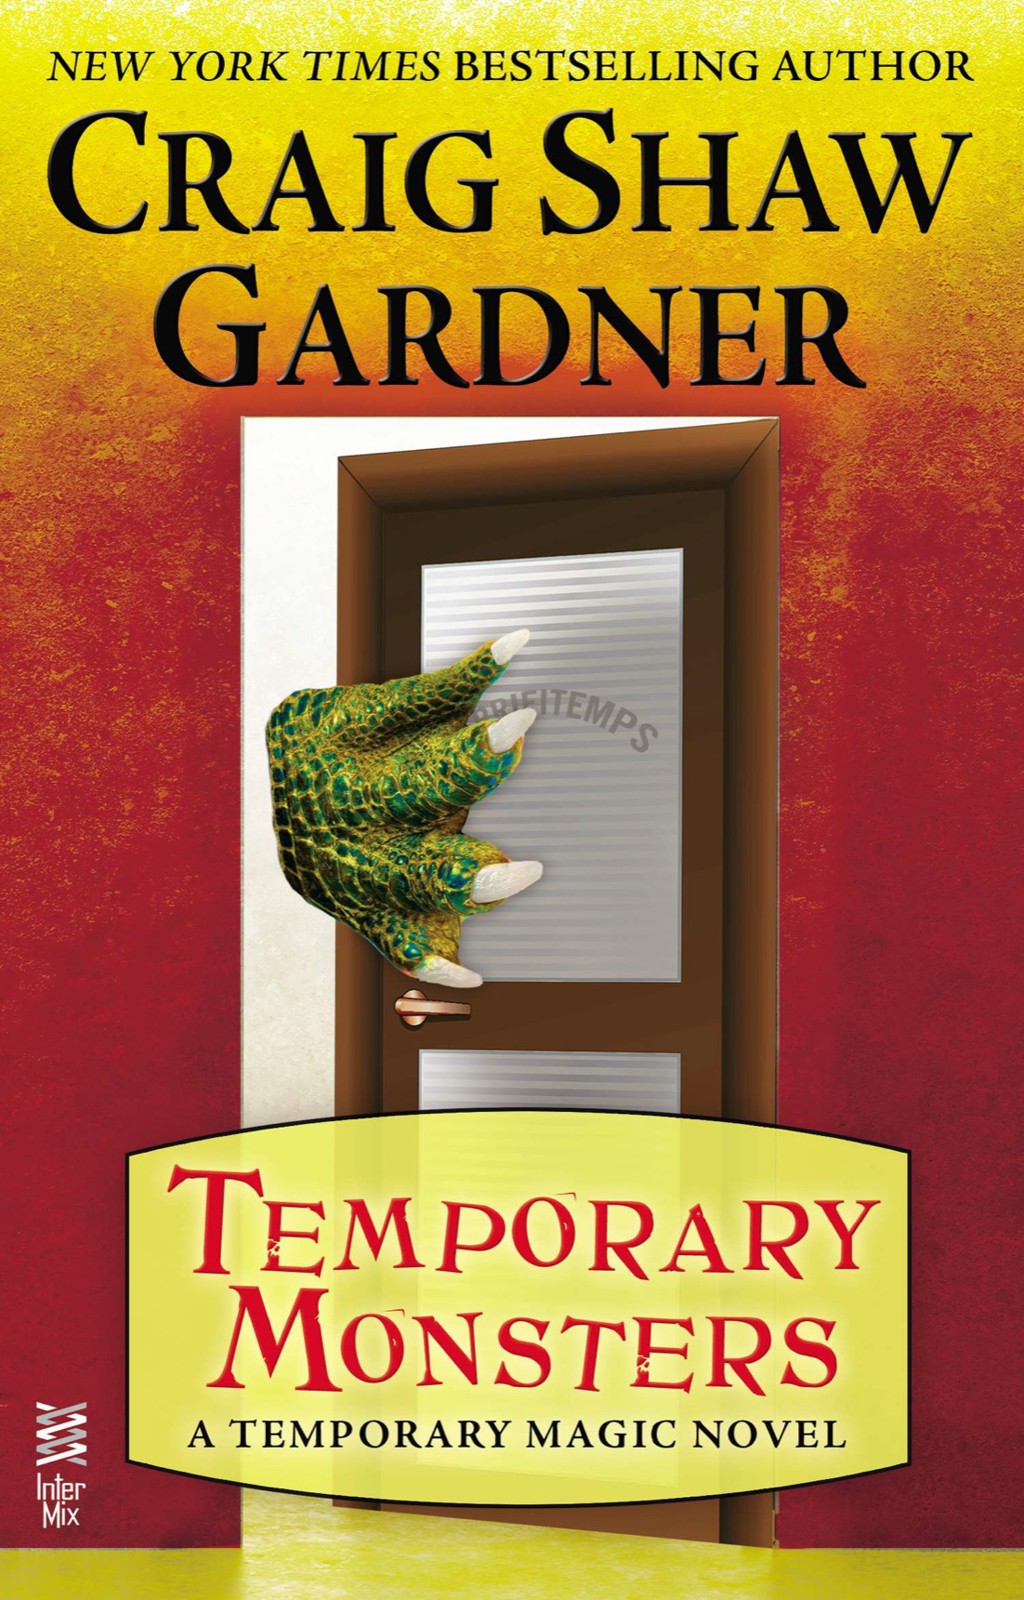 Temporary Monsters by Craig Shaw Gardner